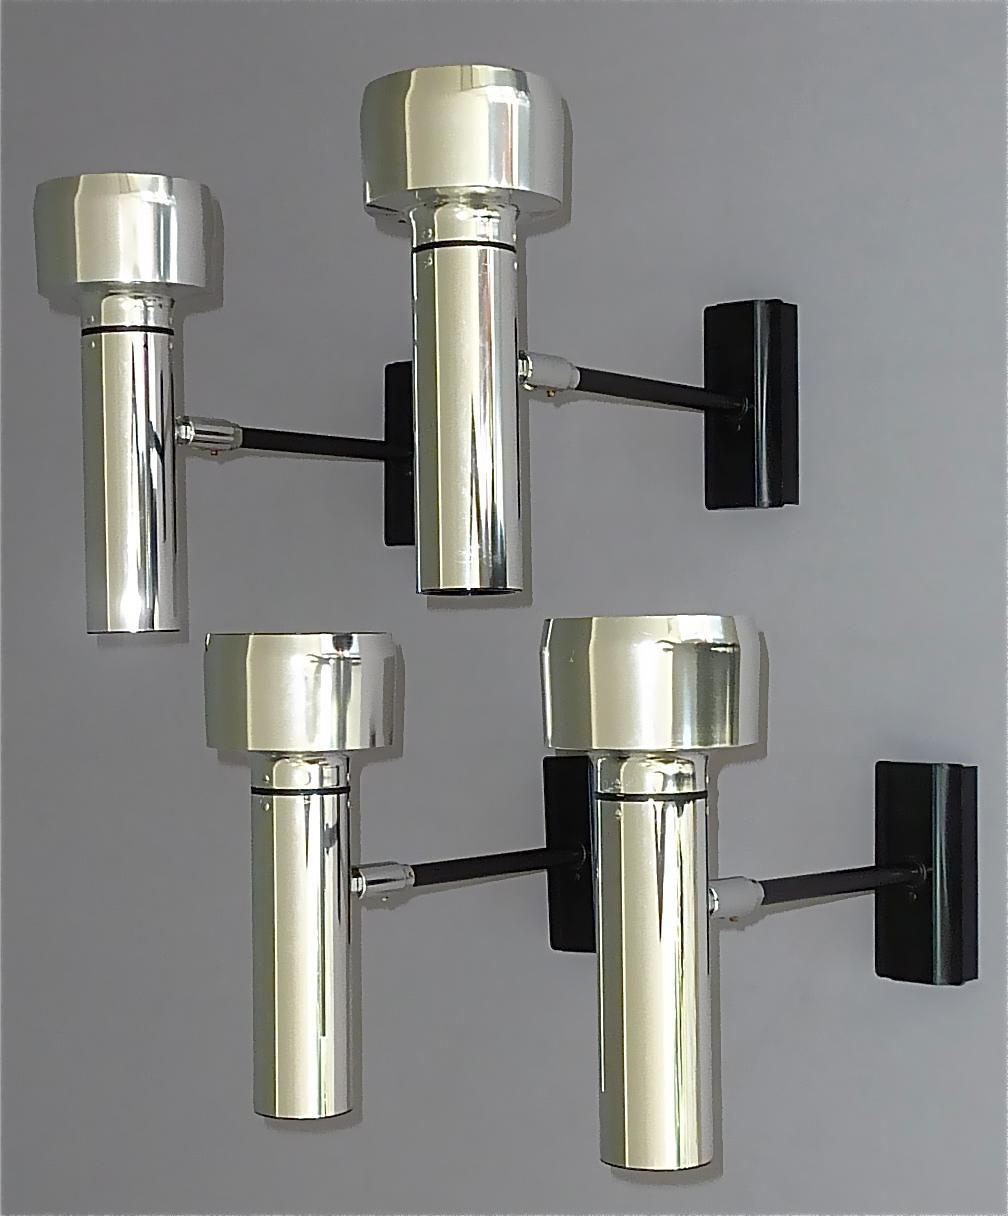 Cool Space Age set of four Gino Sarfatti for Arteluce Style wall lights, sconces, ceiling lights, spots / lamps made by Erco, Germany, circa 1970s. The multifunctional high quality set is made of polished aluminum, black enameled chrome metal and